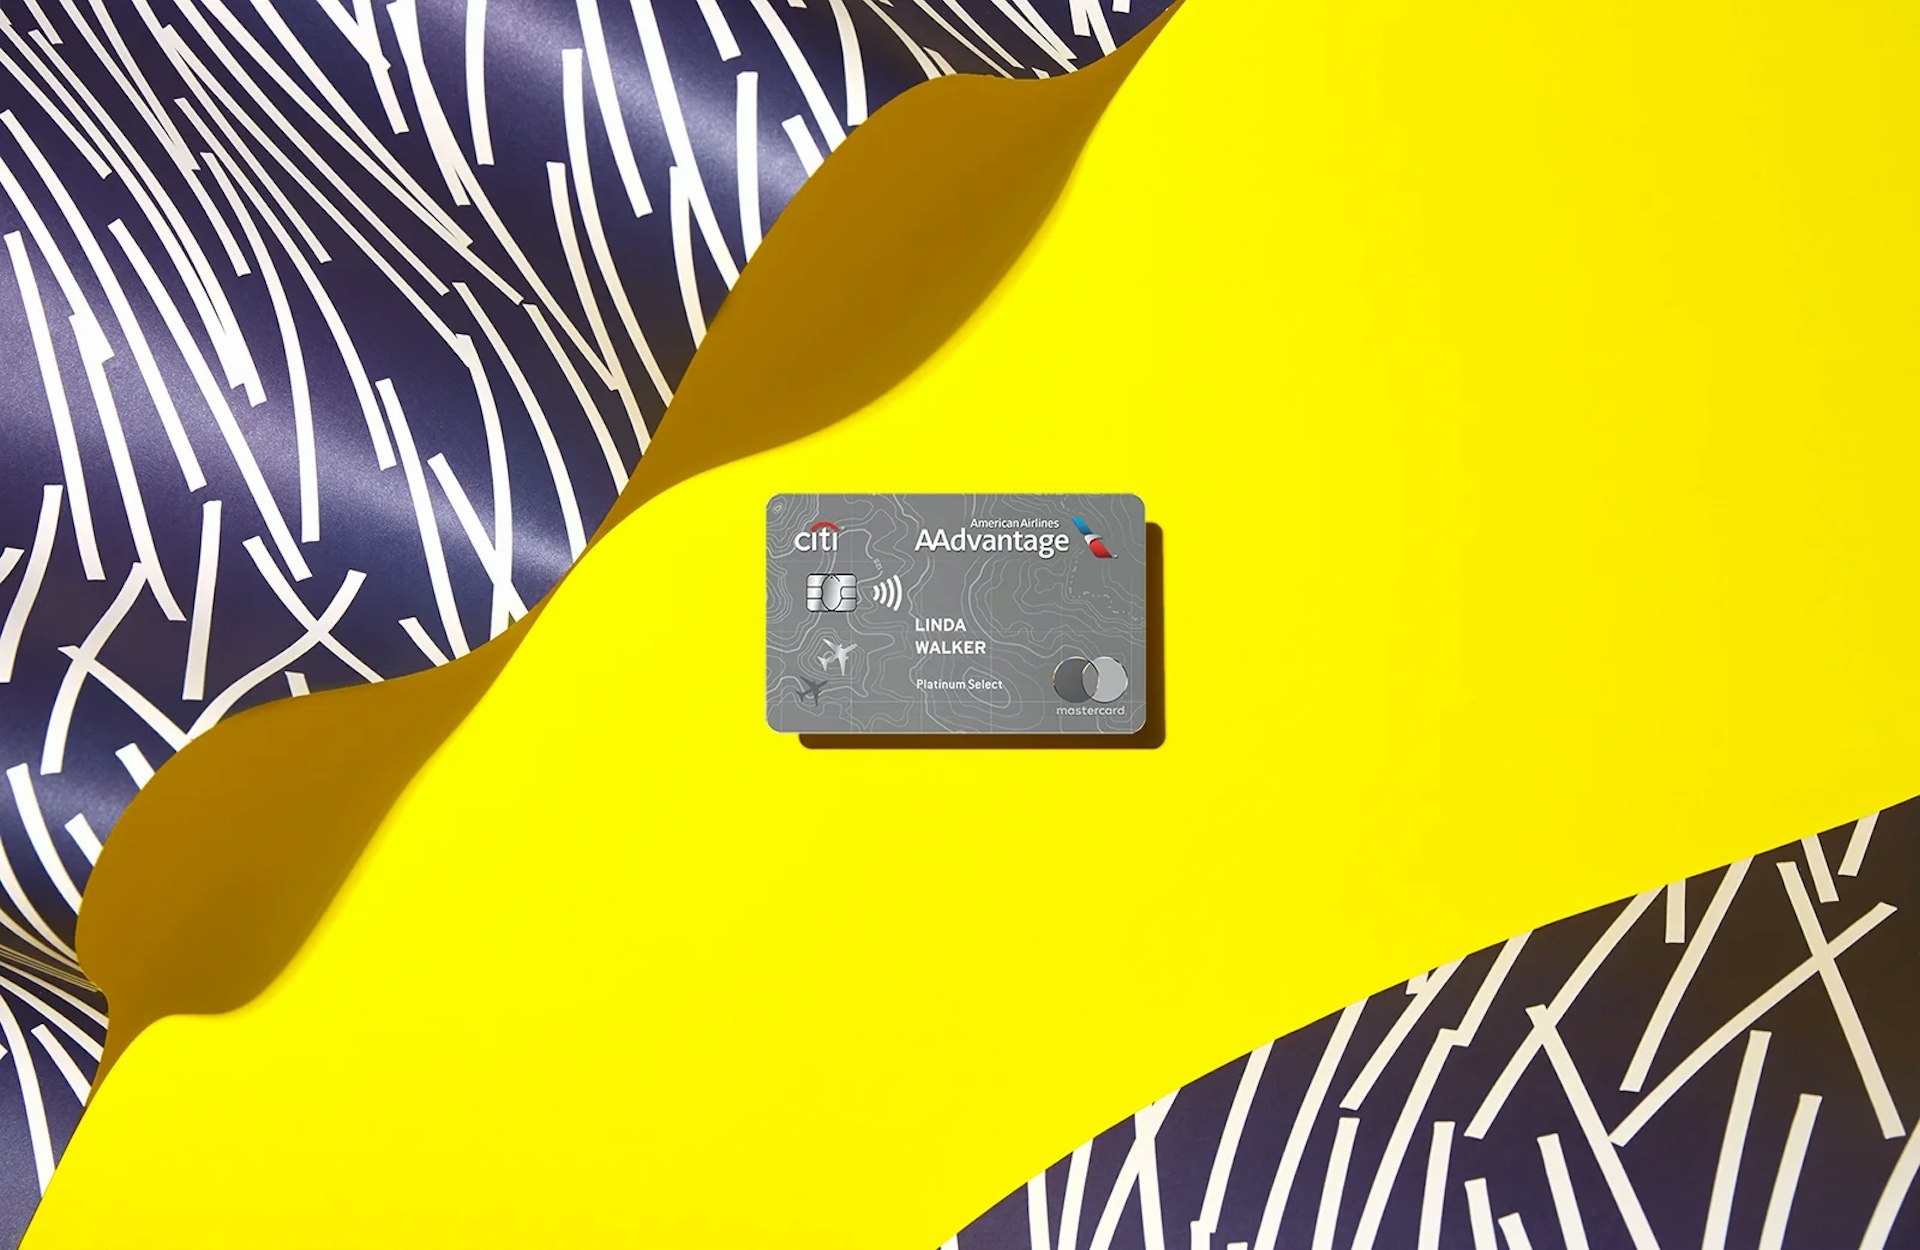 Quickly earn American miles with a co-branded credit card 